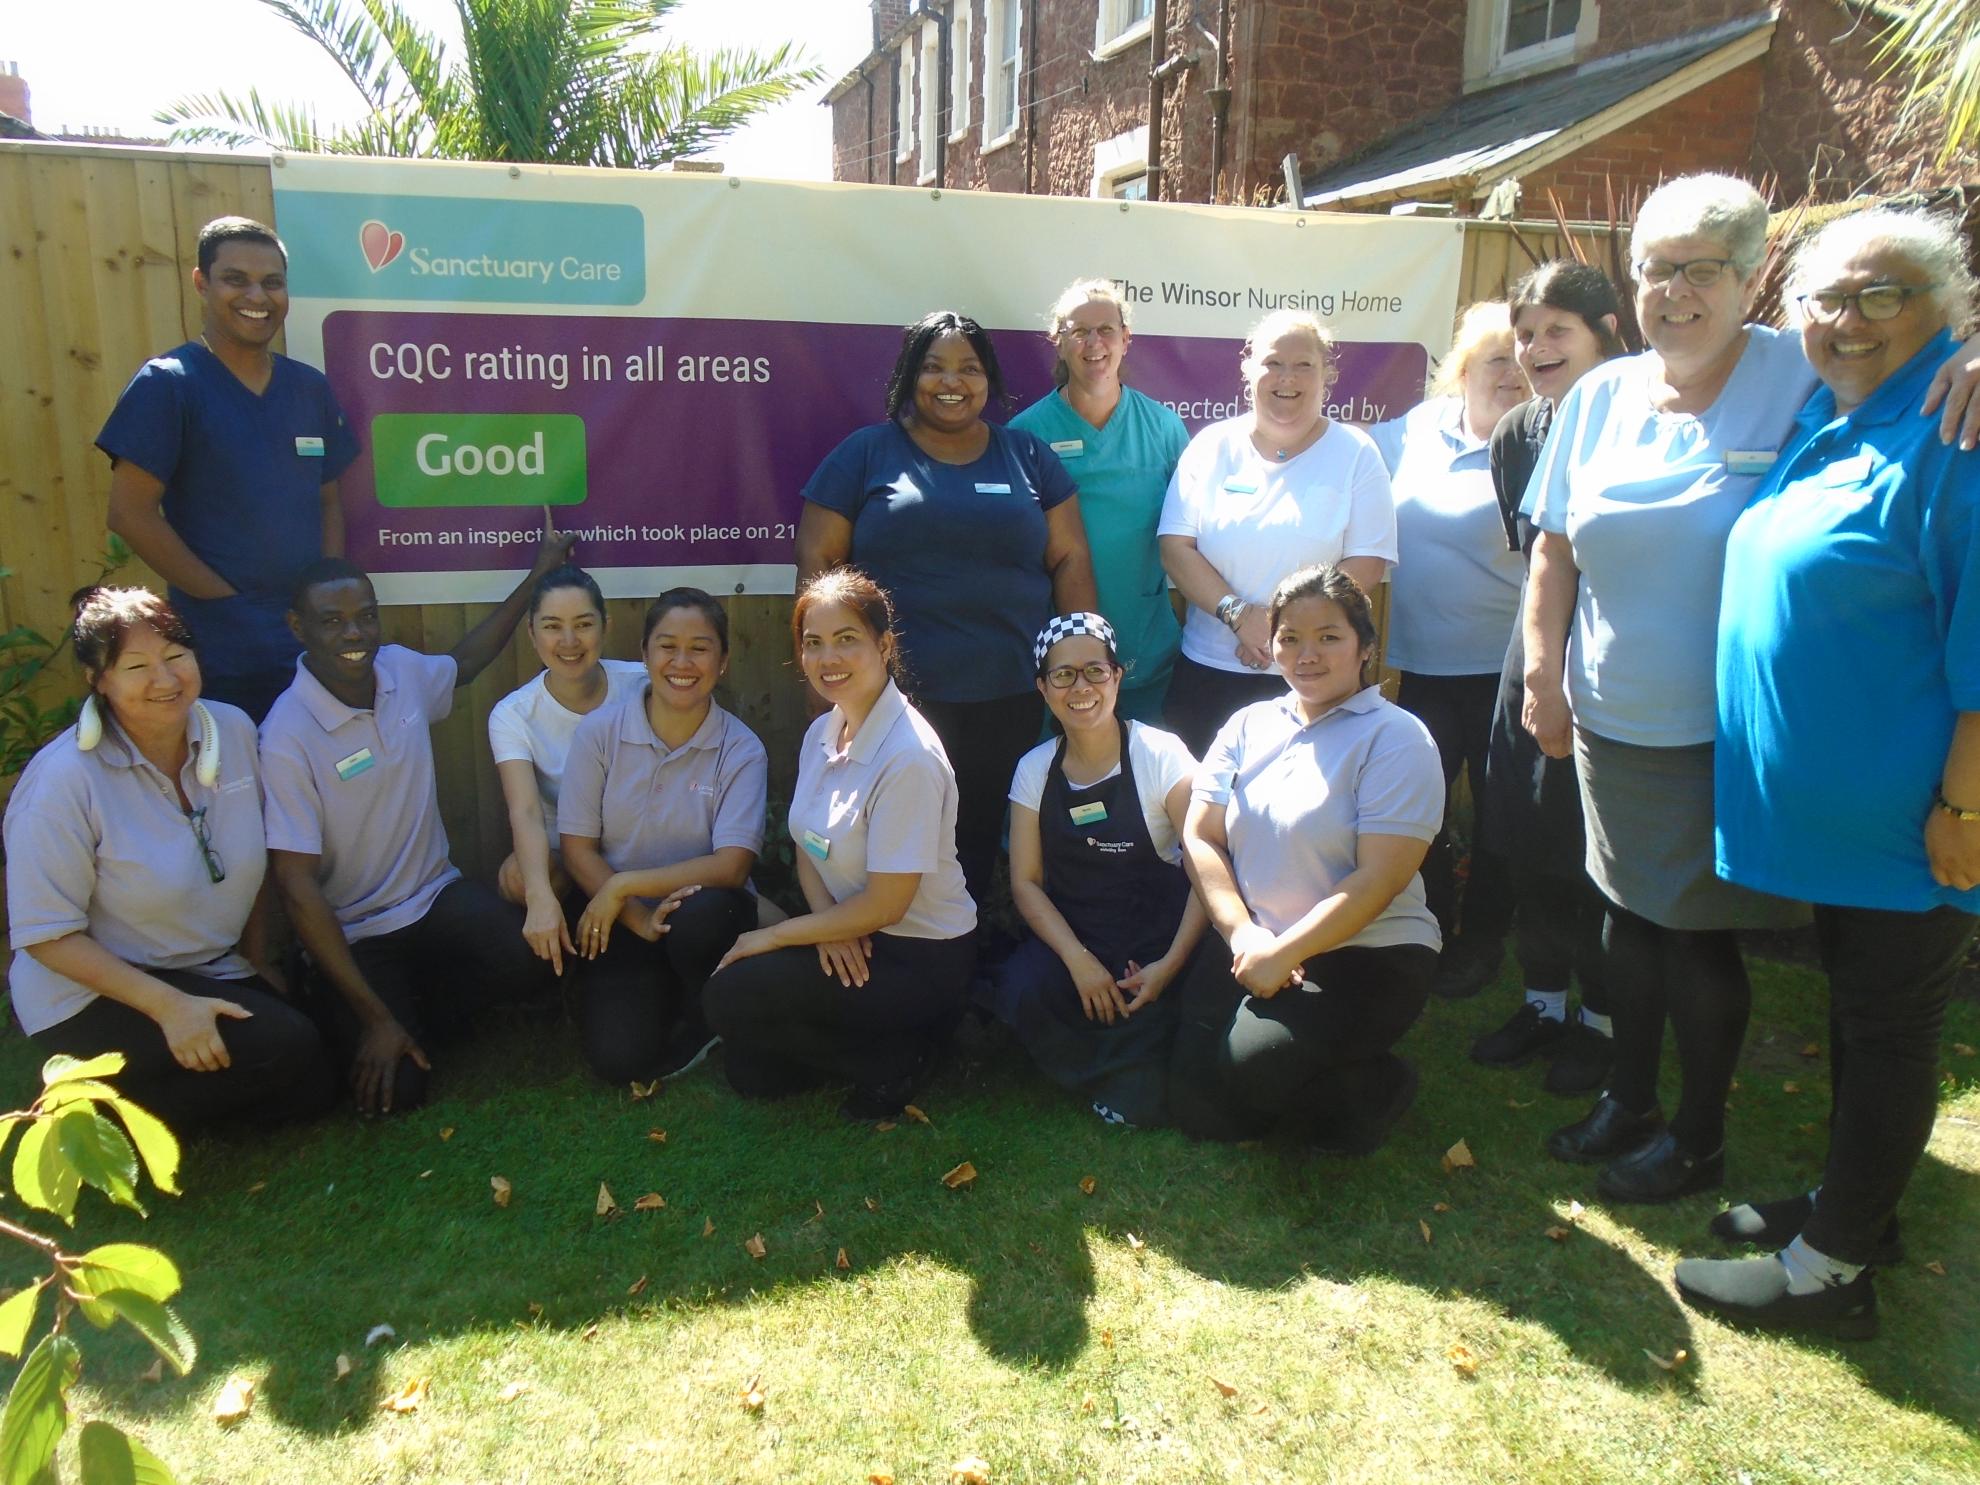 The team at The Winsor, our nursing home in Minehead, celebrate their Good CQC rating 